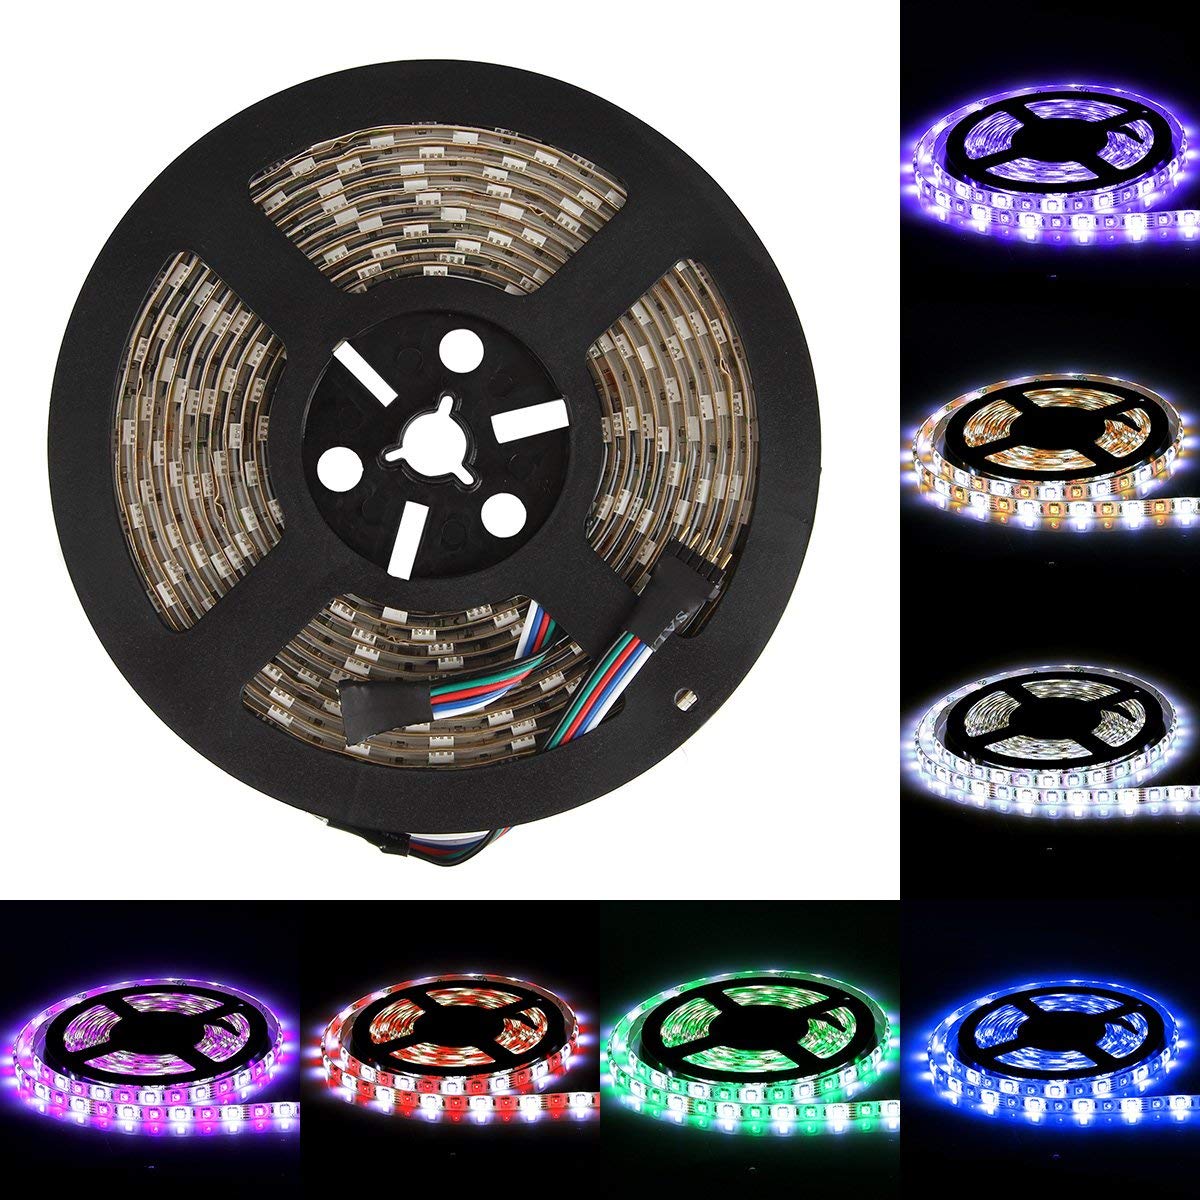 SUPERNIGHT LED Strip Light, RGBW, Waterproof 16.4ft 5050 300leds LED Strip Flexible Light, RGB with White Mixed Color Tape for TV Backlighting, Bedroom, Car, Carbin